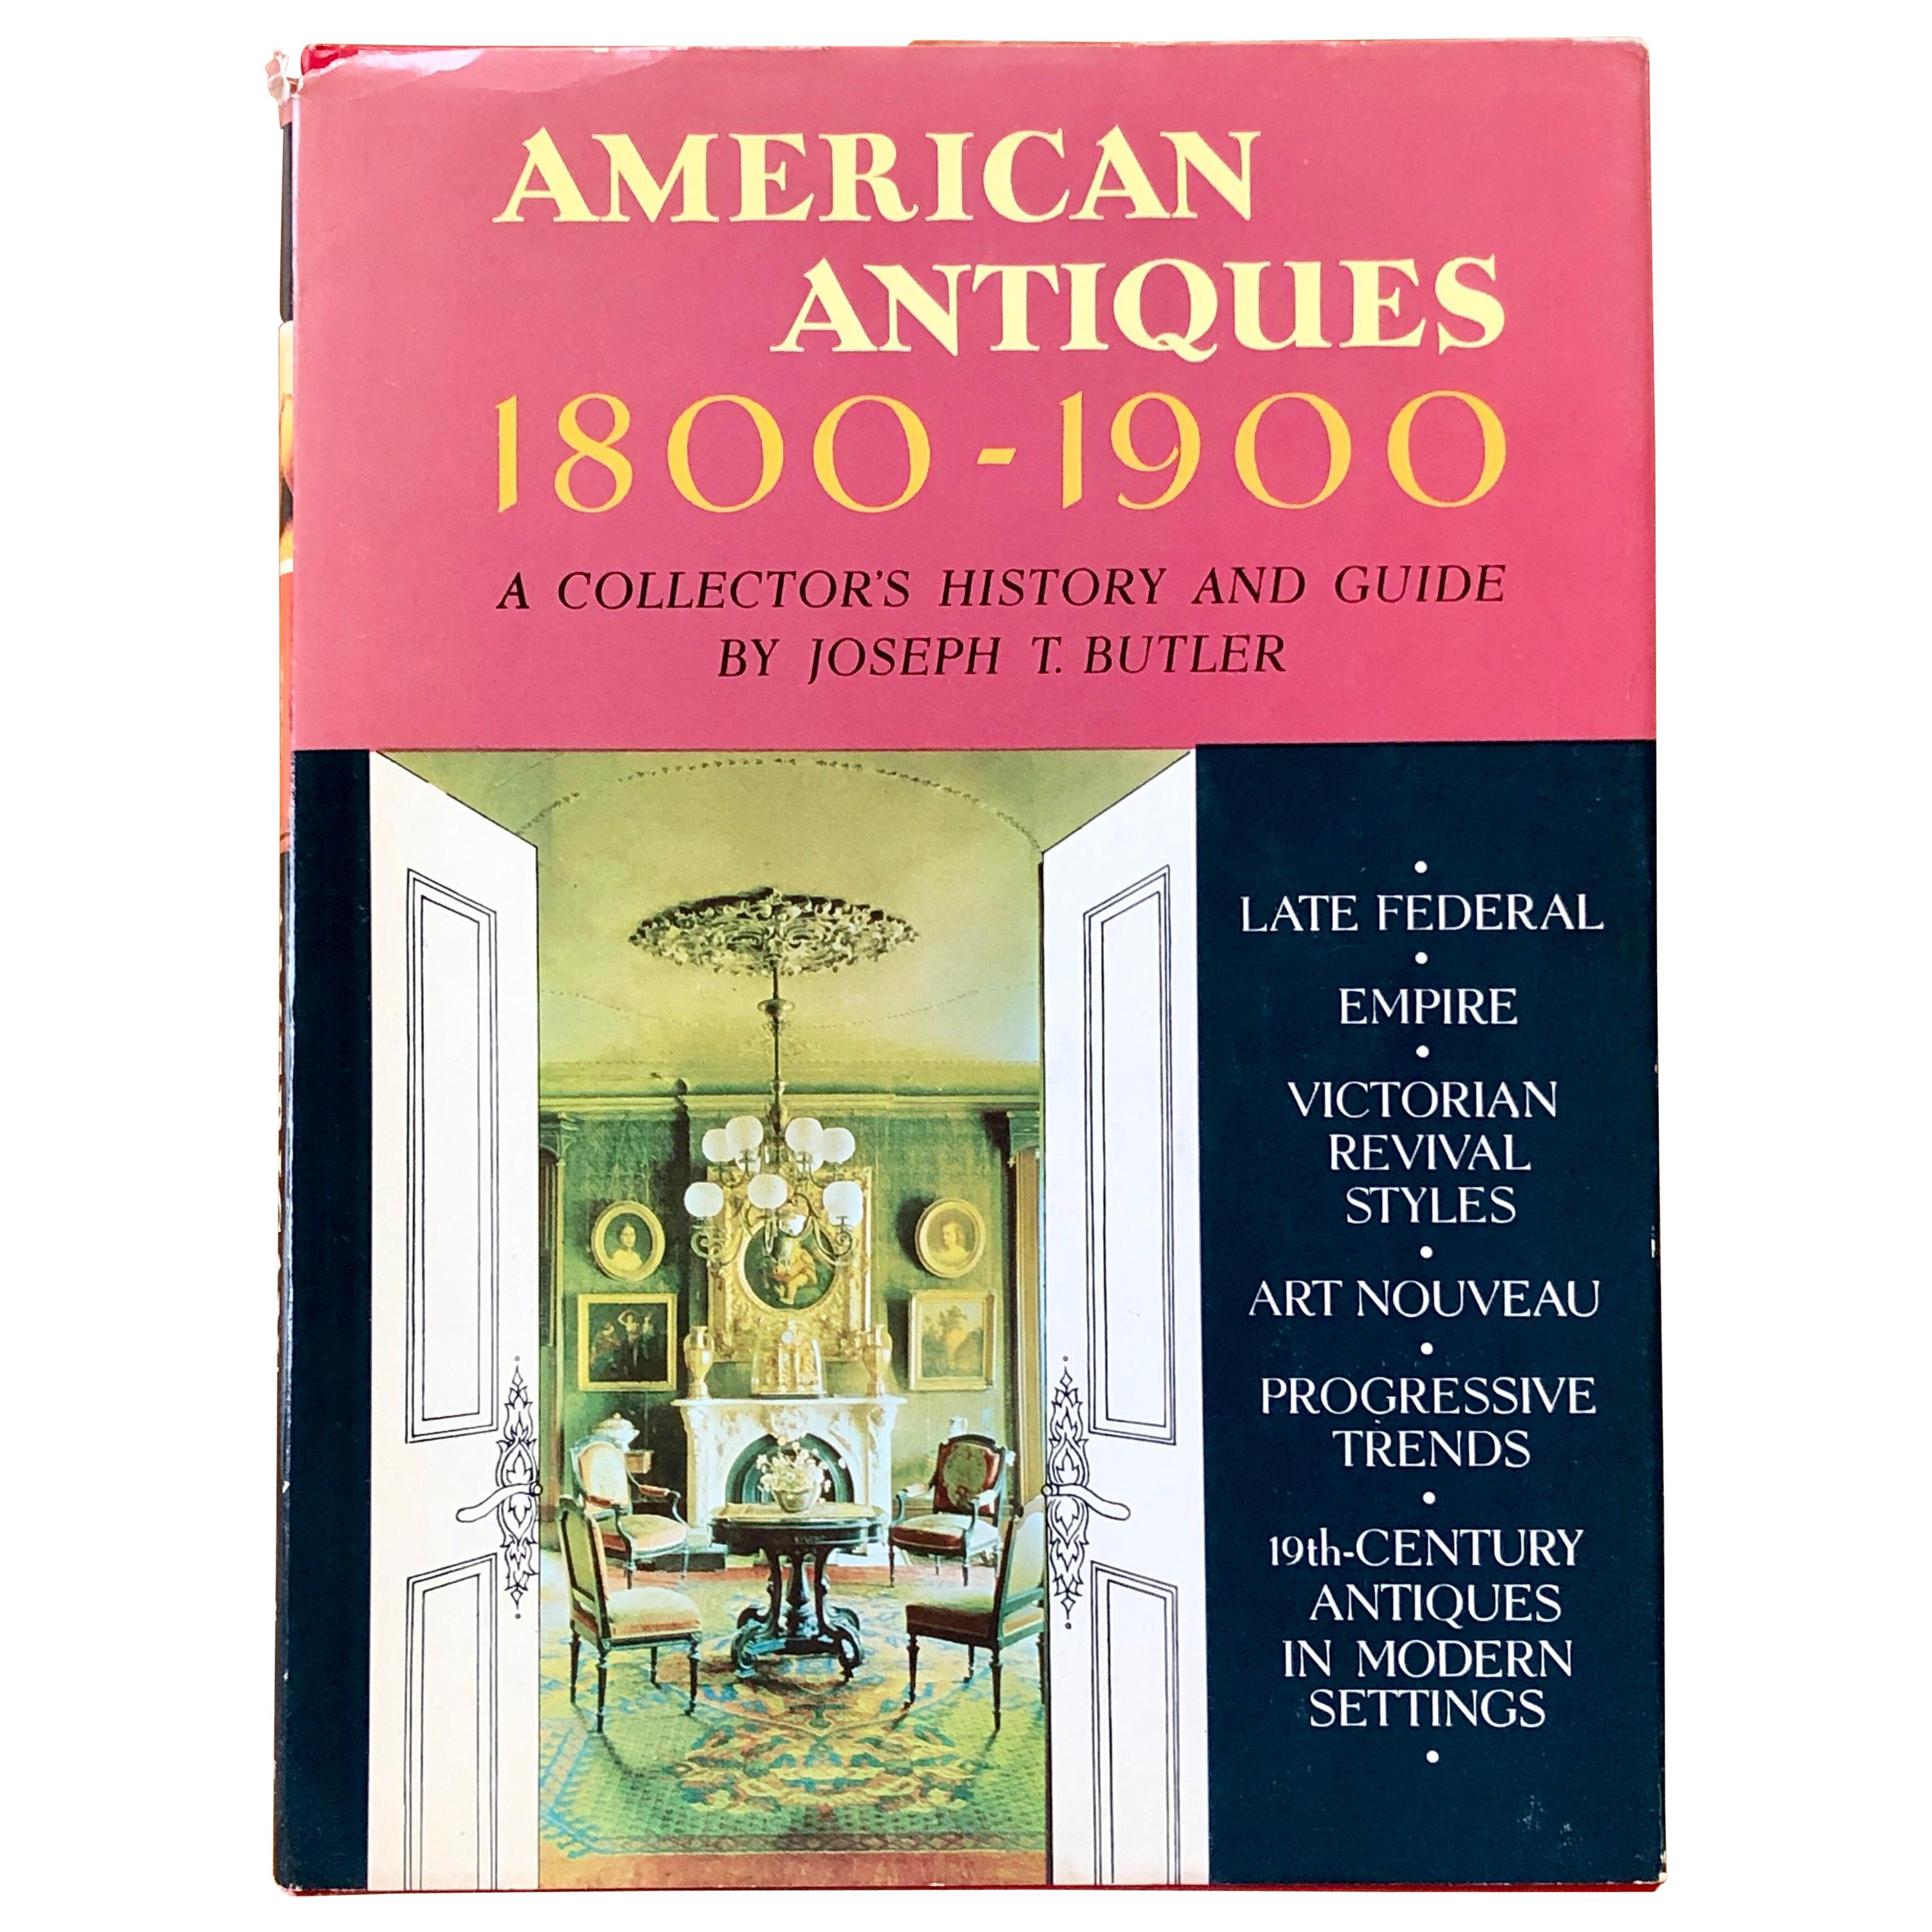 American Antiques 1800-1900 “A Collector's History and Guide", USA, 1965